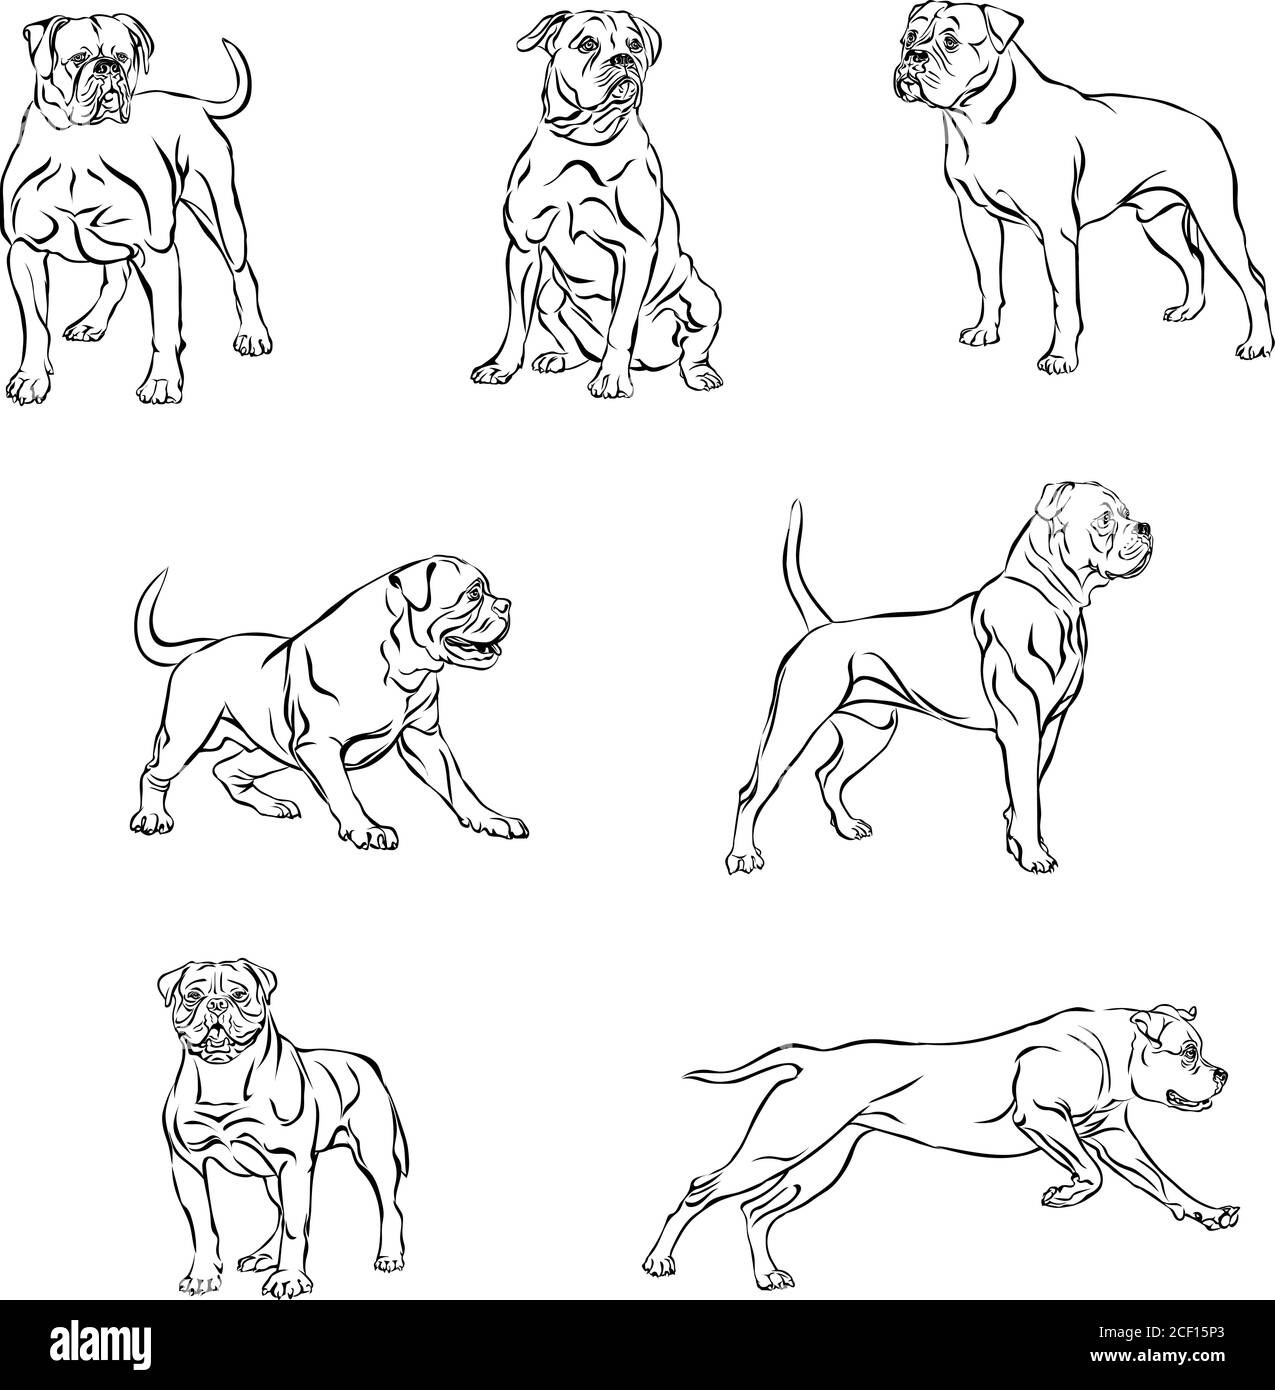 Dog, bulldog in motion, different poses, black, color, various poses, movements and angles of figures, black, silhouette, set, vector, illustration Stock Vector